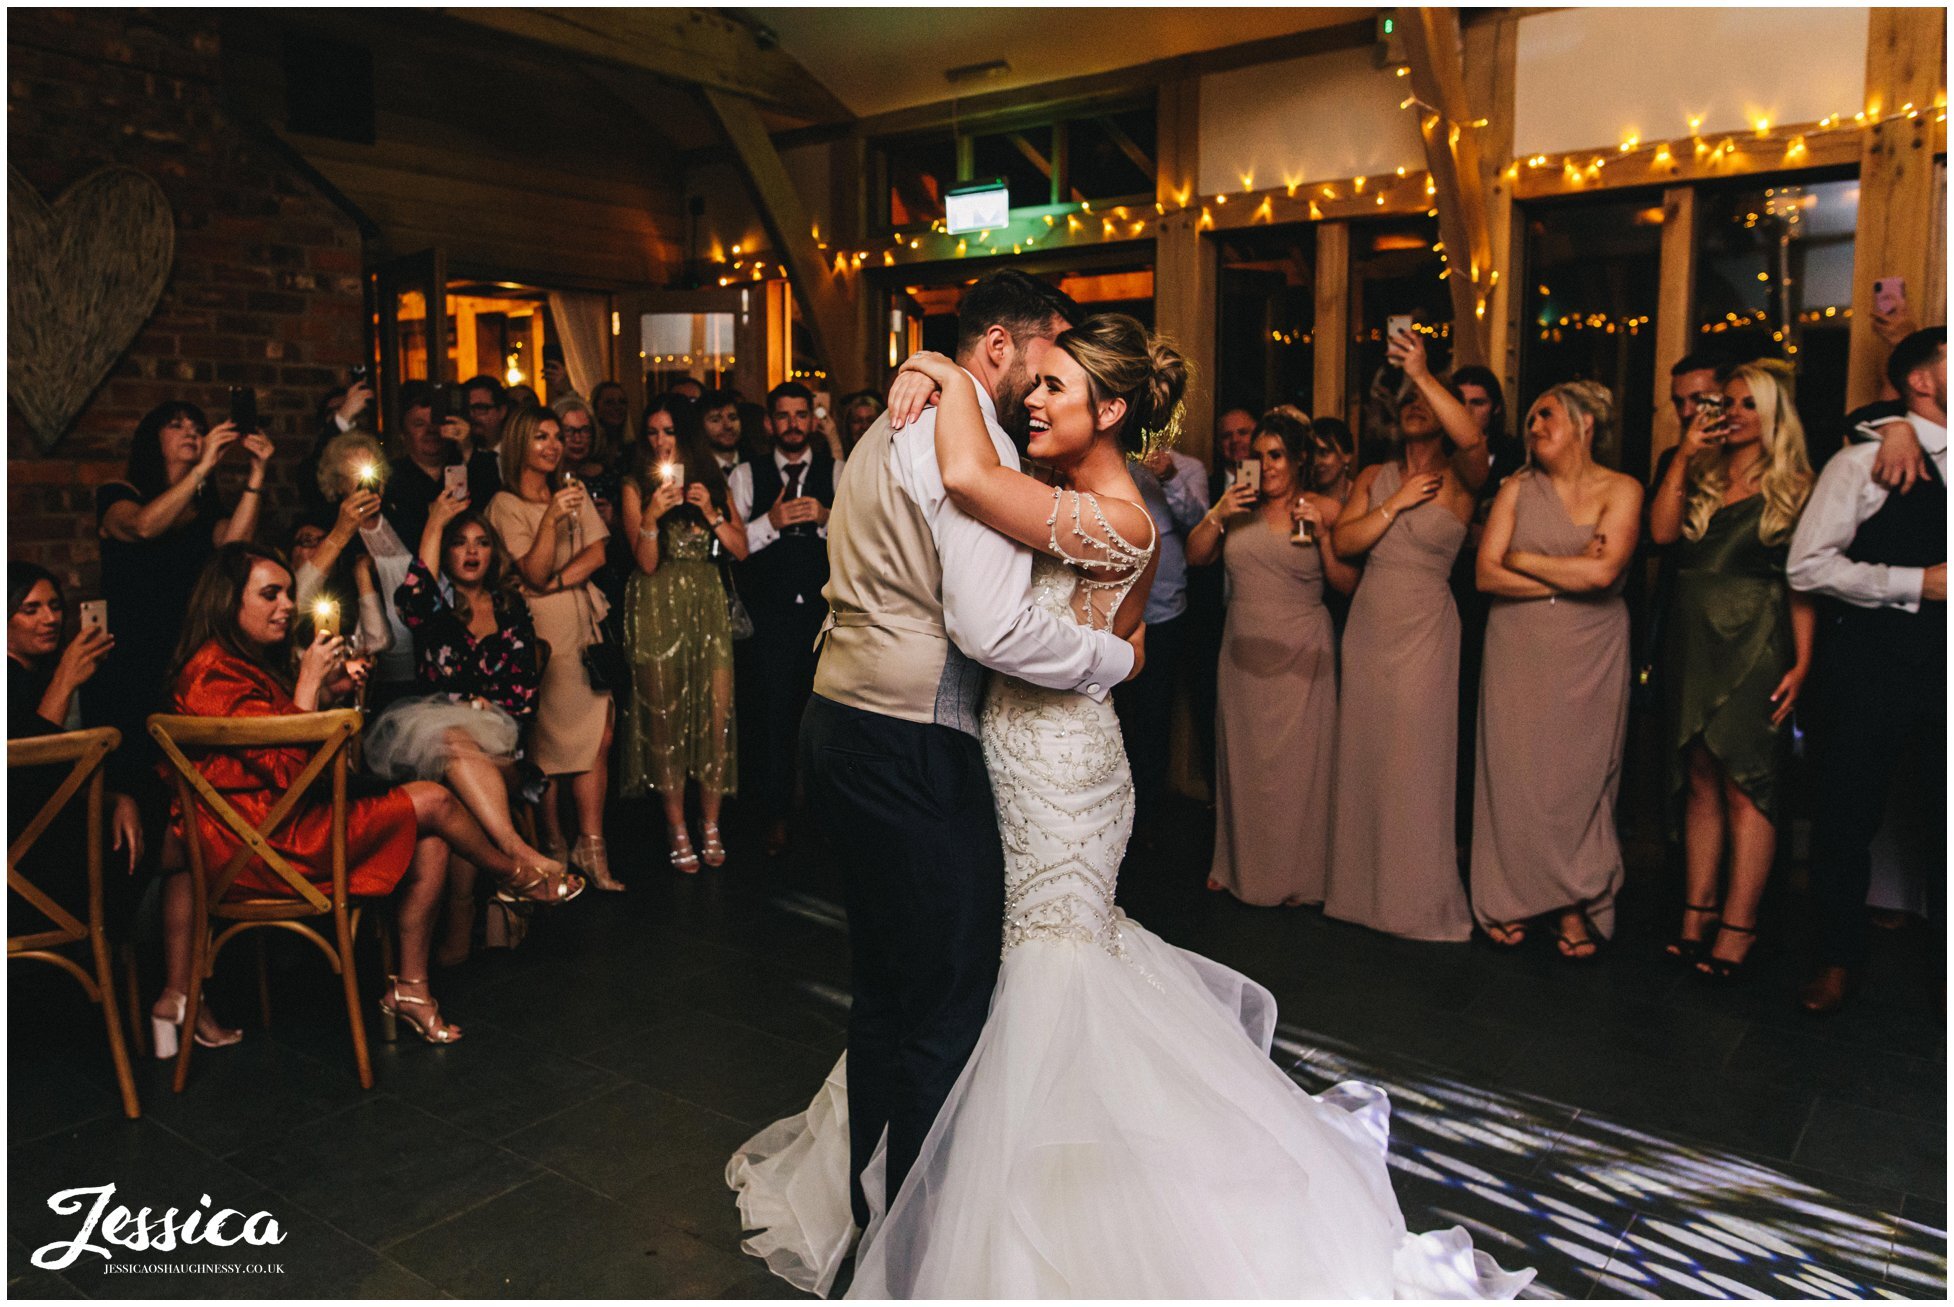 the couple share their first dance together